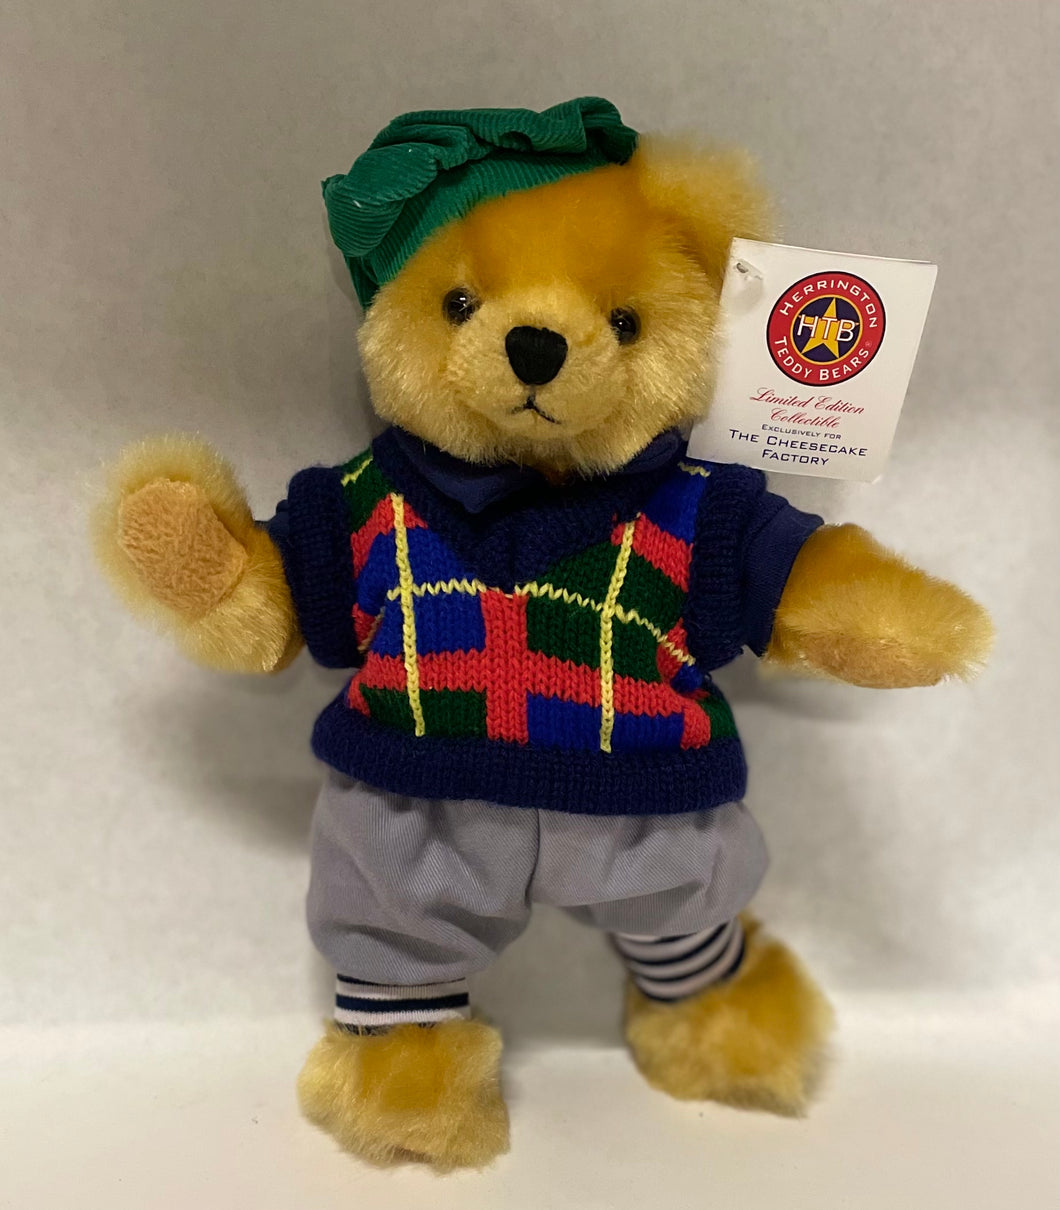 2004 Golfer Teddy Bear-Treasures from the Archives